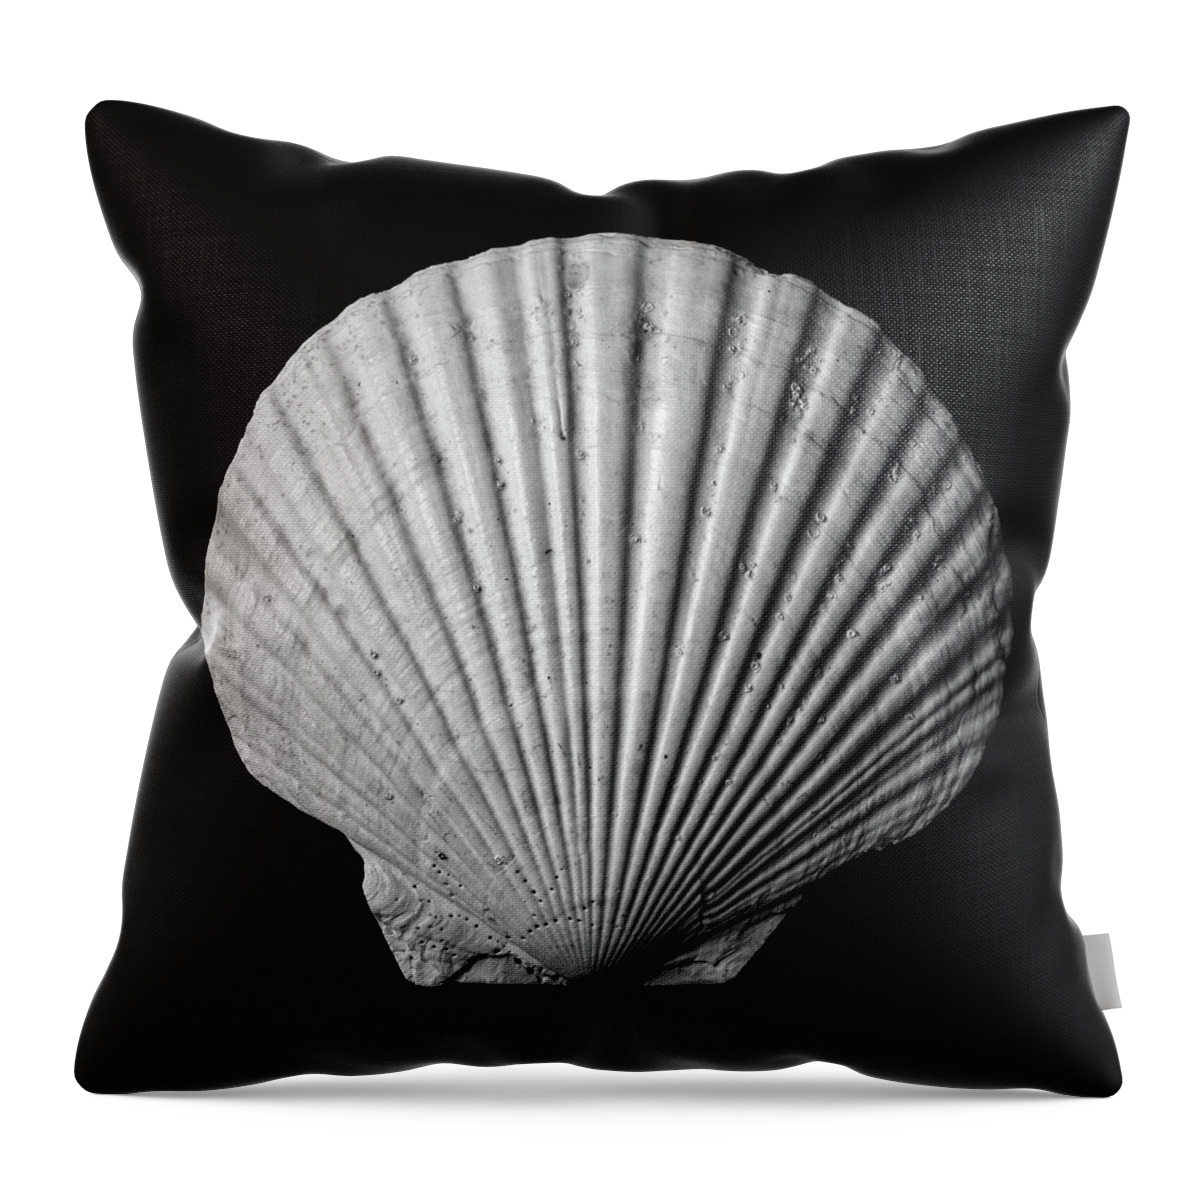 Sea Shell Throw Pillow featuring the photograph Scallop Seashell by Jim Hughes